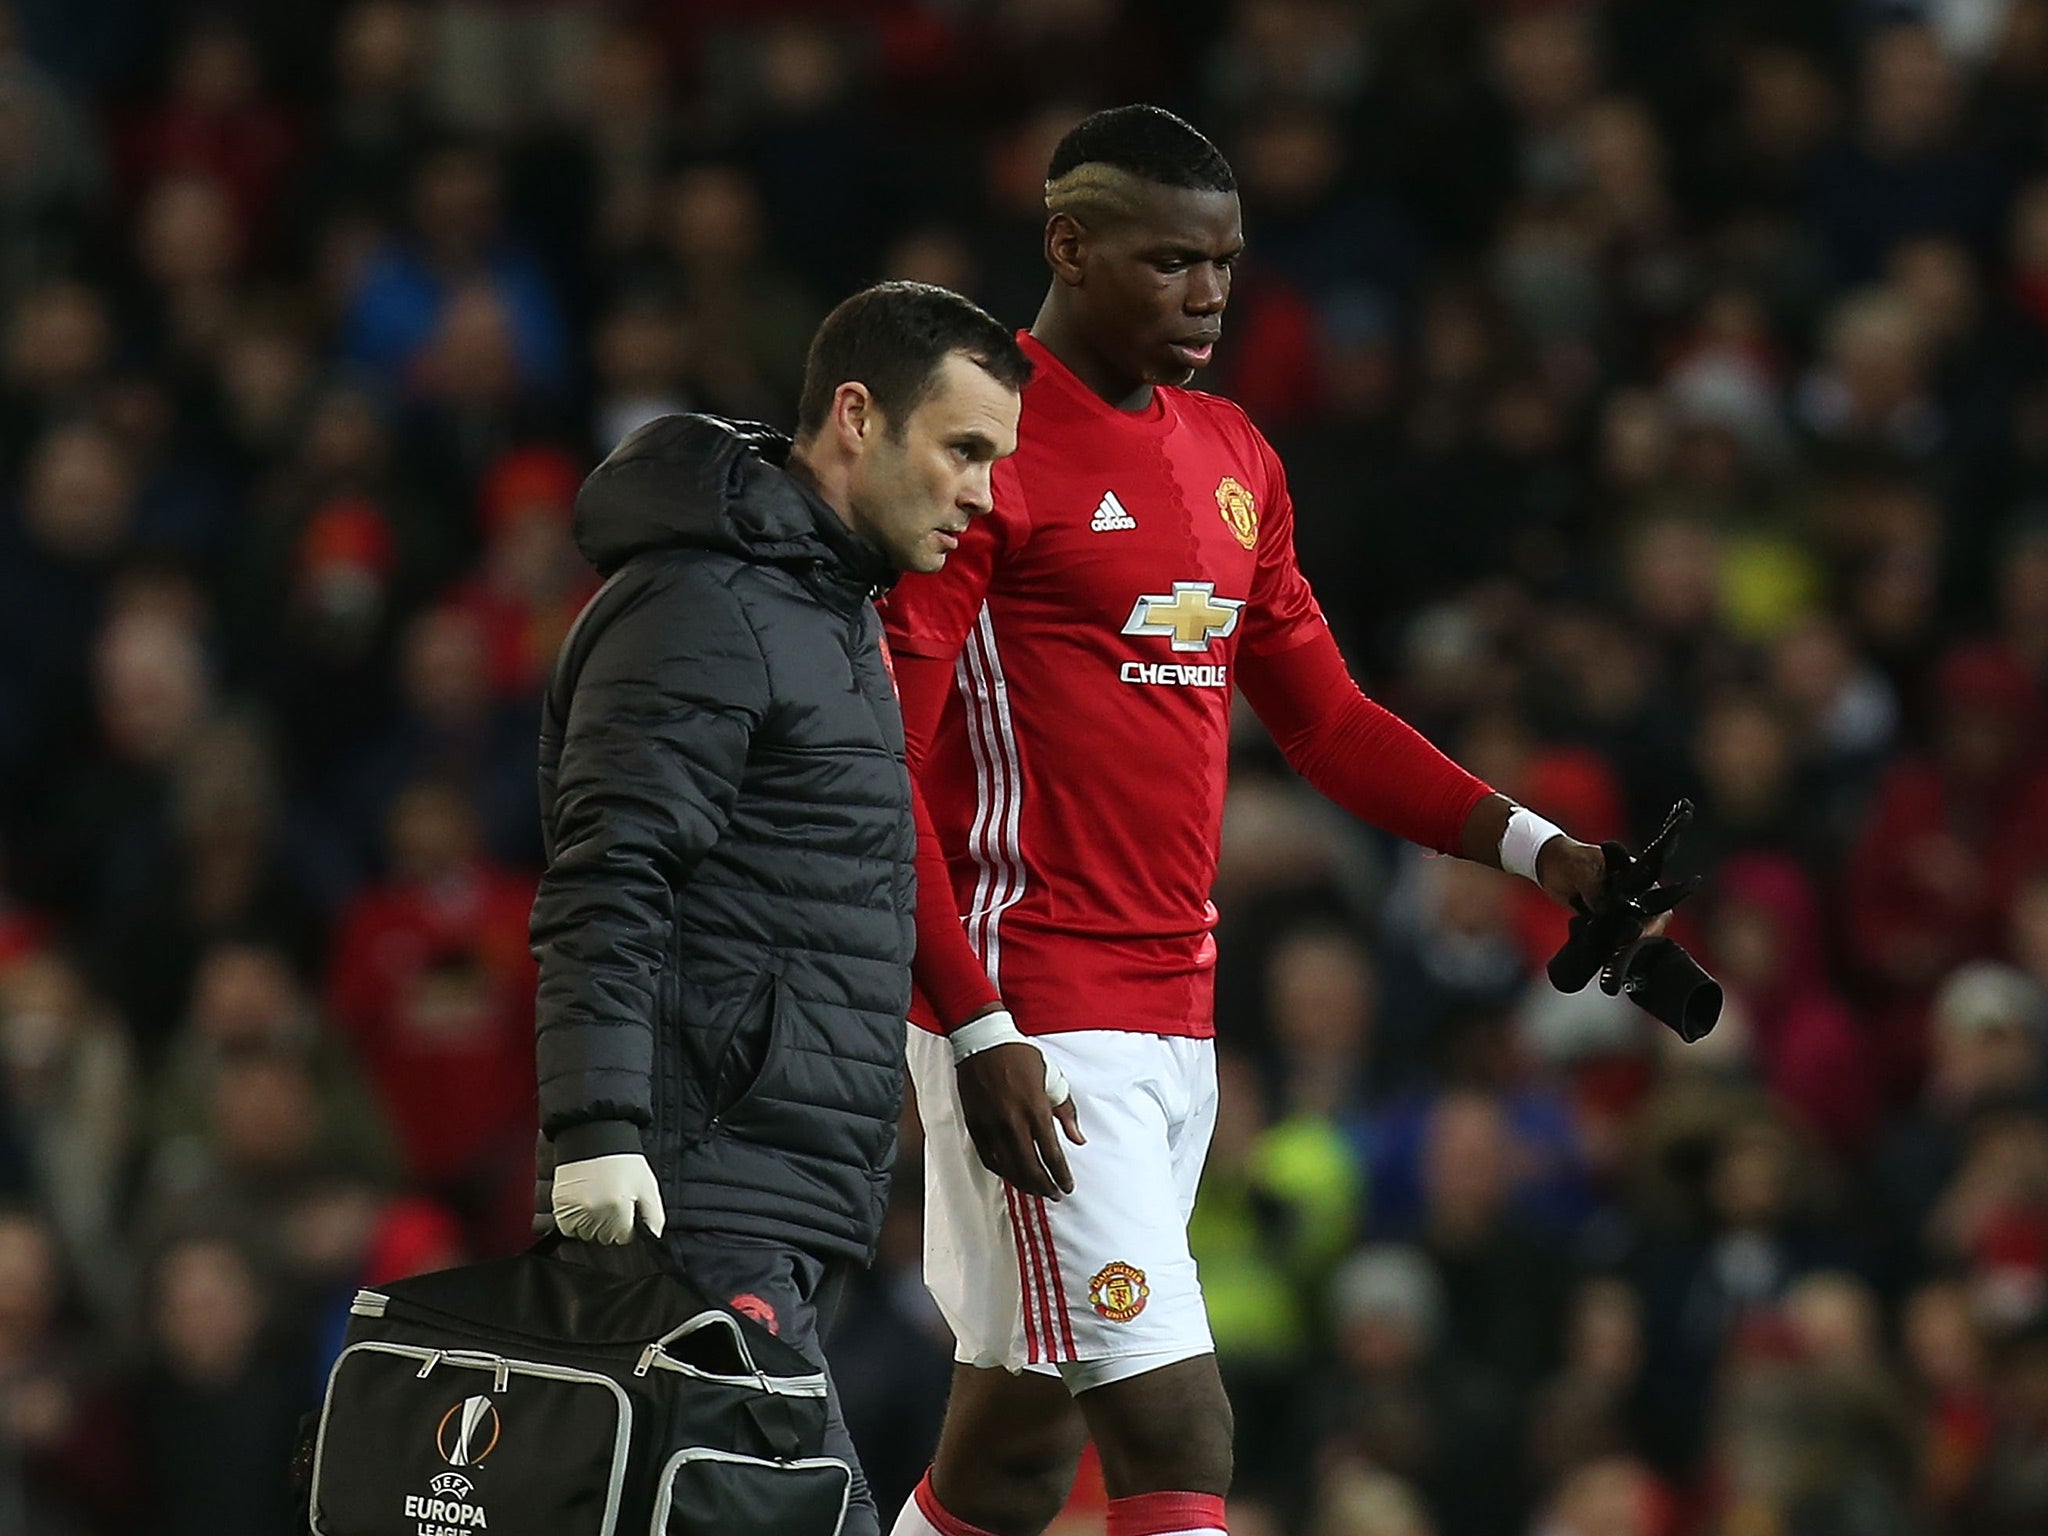 Paul Pogba is out for an unspecified amount of time